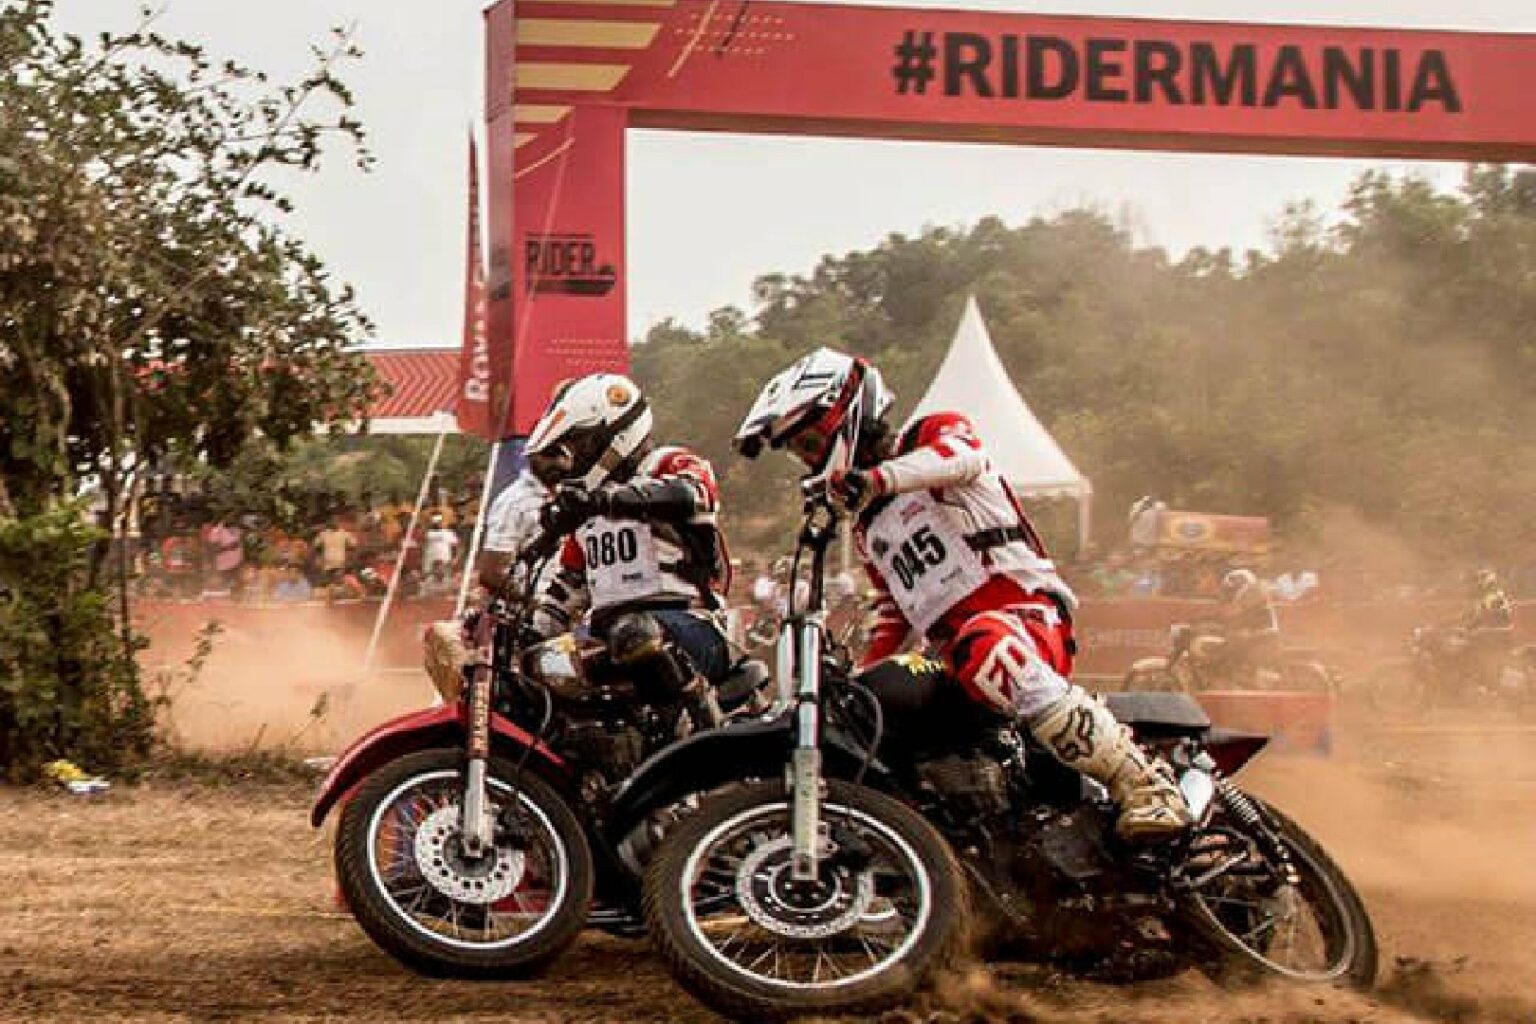 Royal Enfield Rider Mania 2022 is all set for a comeback Motoring World